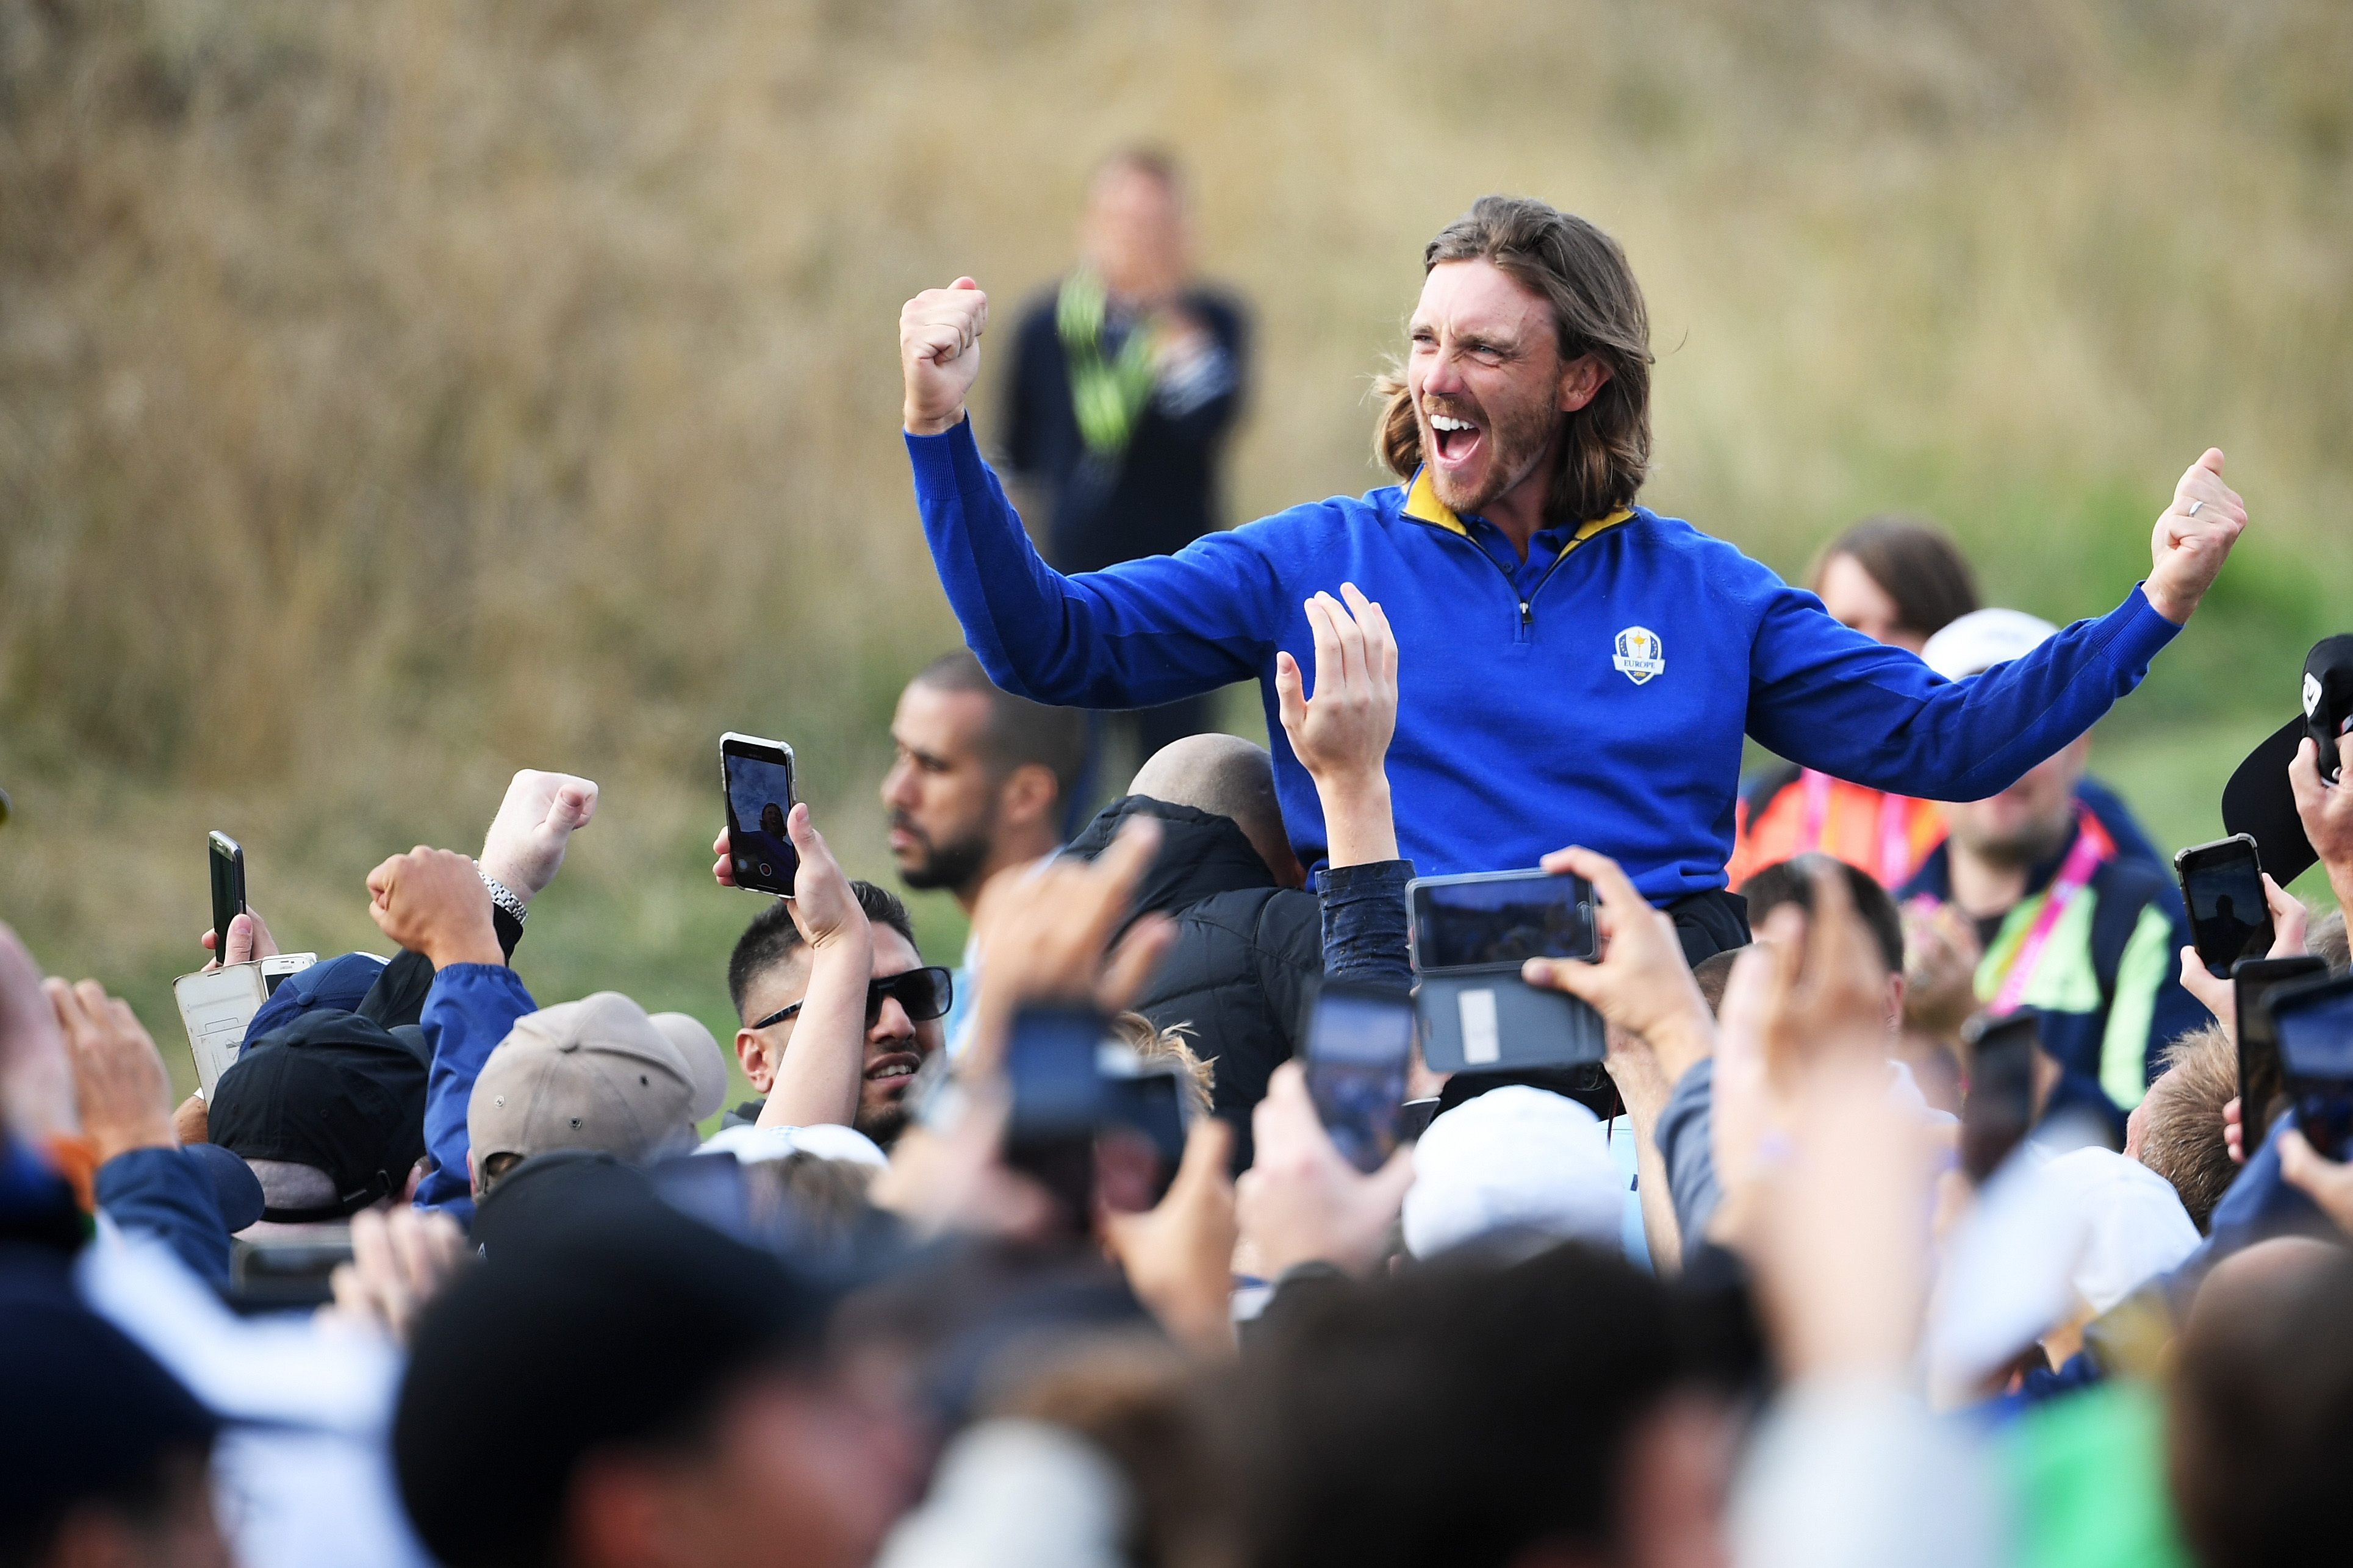 CRUSHED -- Europe Hands U.S. Another Ryder Cup Drubbing